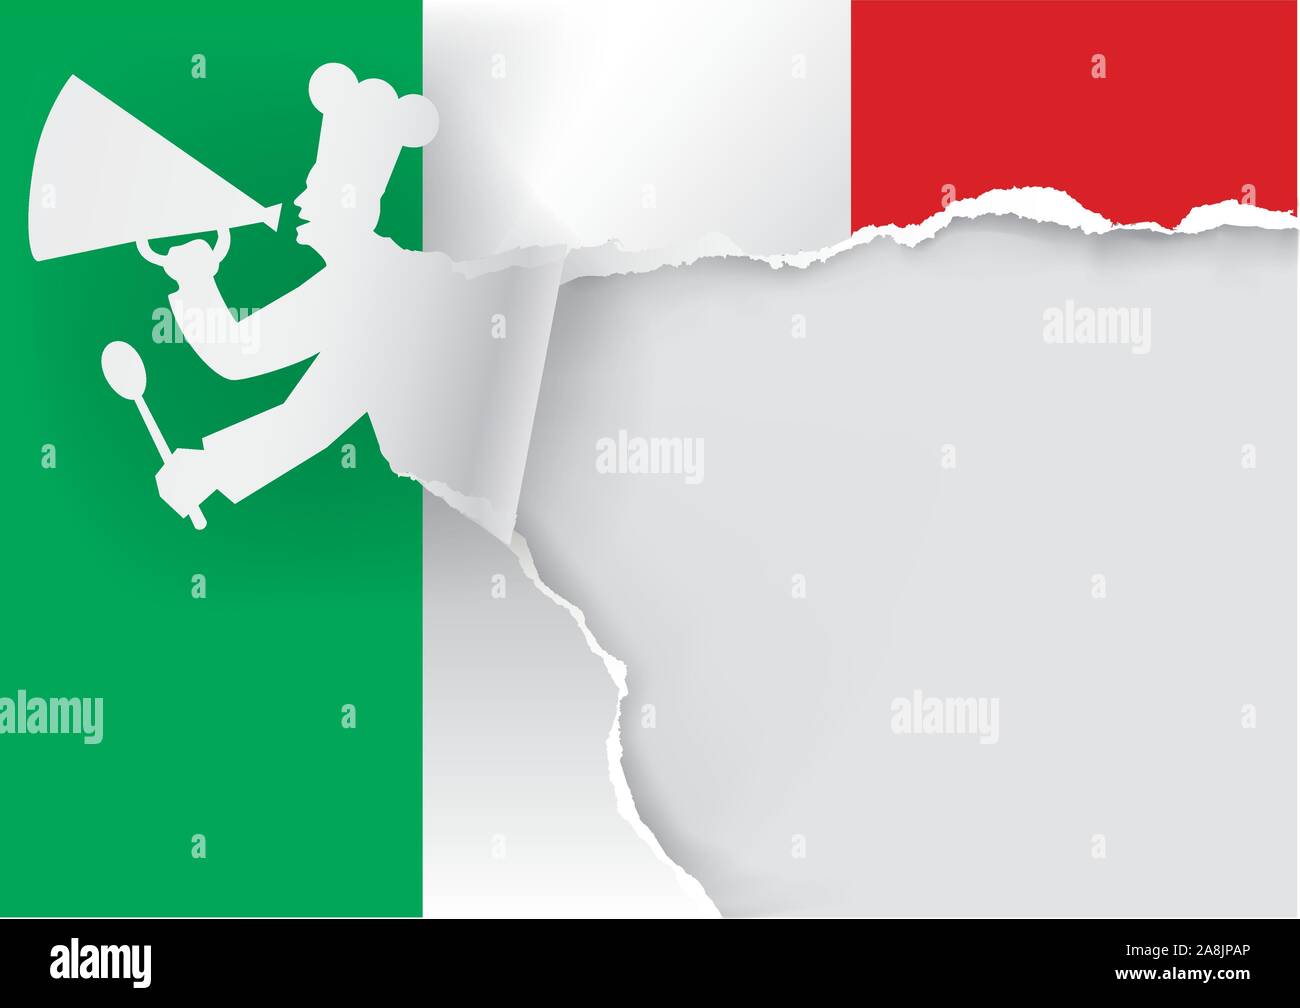 Italian Regional Cuisine promotion template  Illustration of torn paper with Italian flag and cook with megaphone. Place for your text or image.Vector Stock Vector